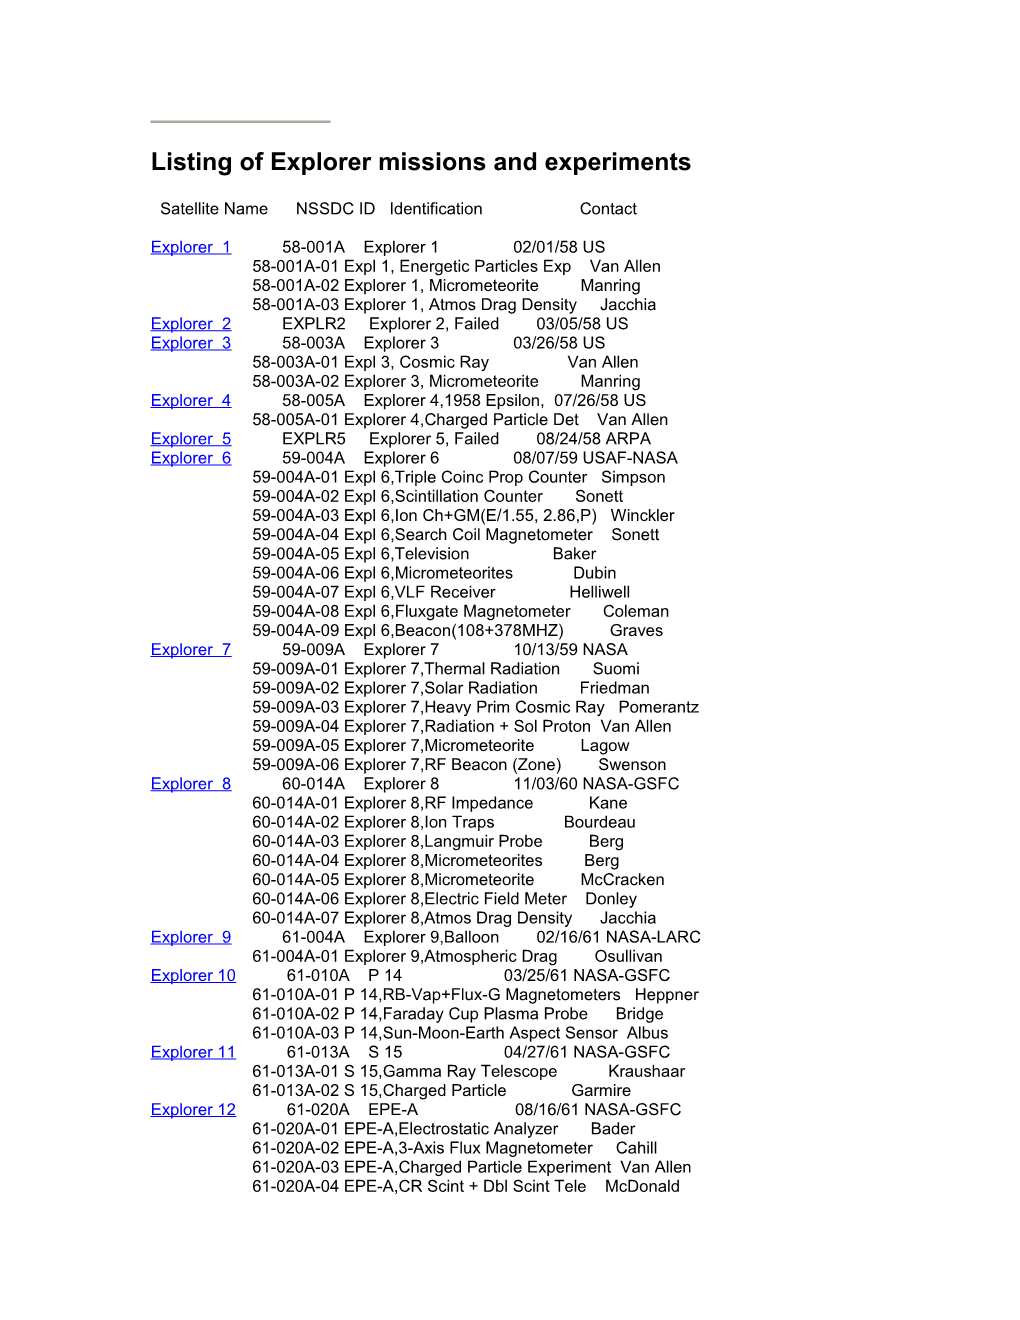 Listing of Explorer Missions and Experiments